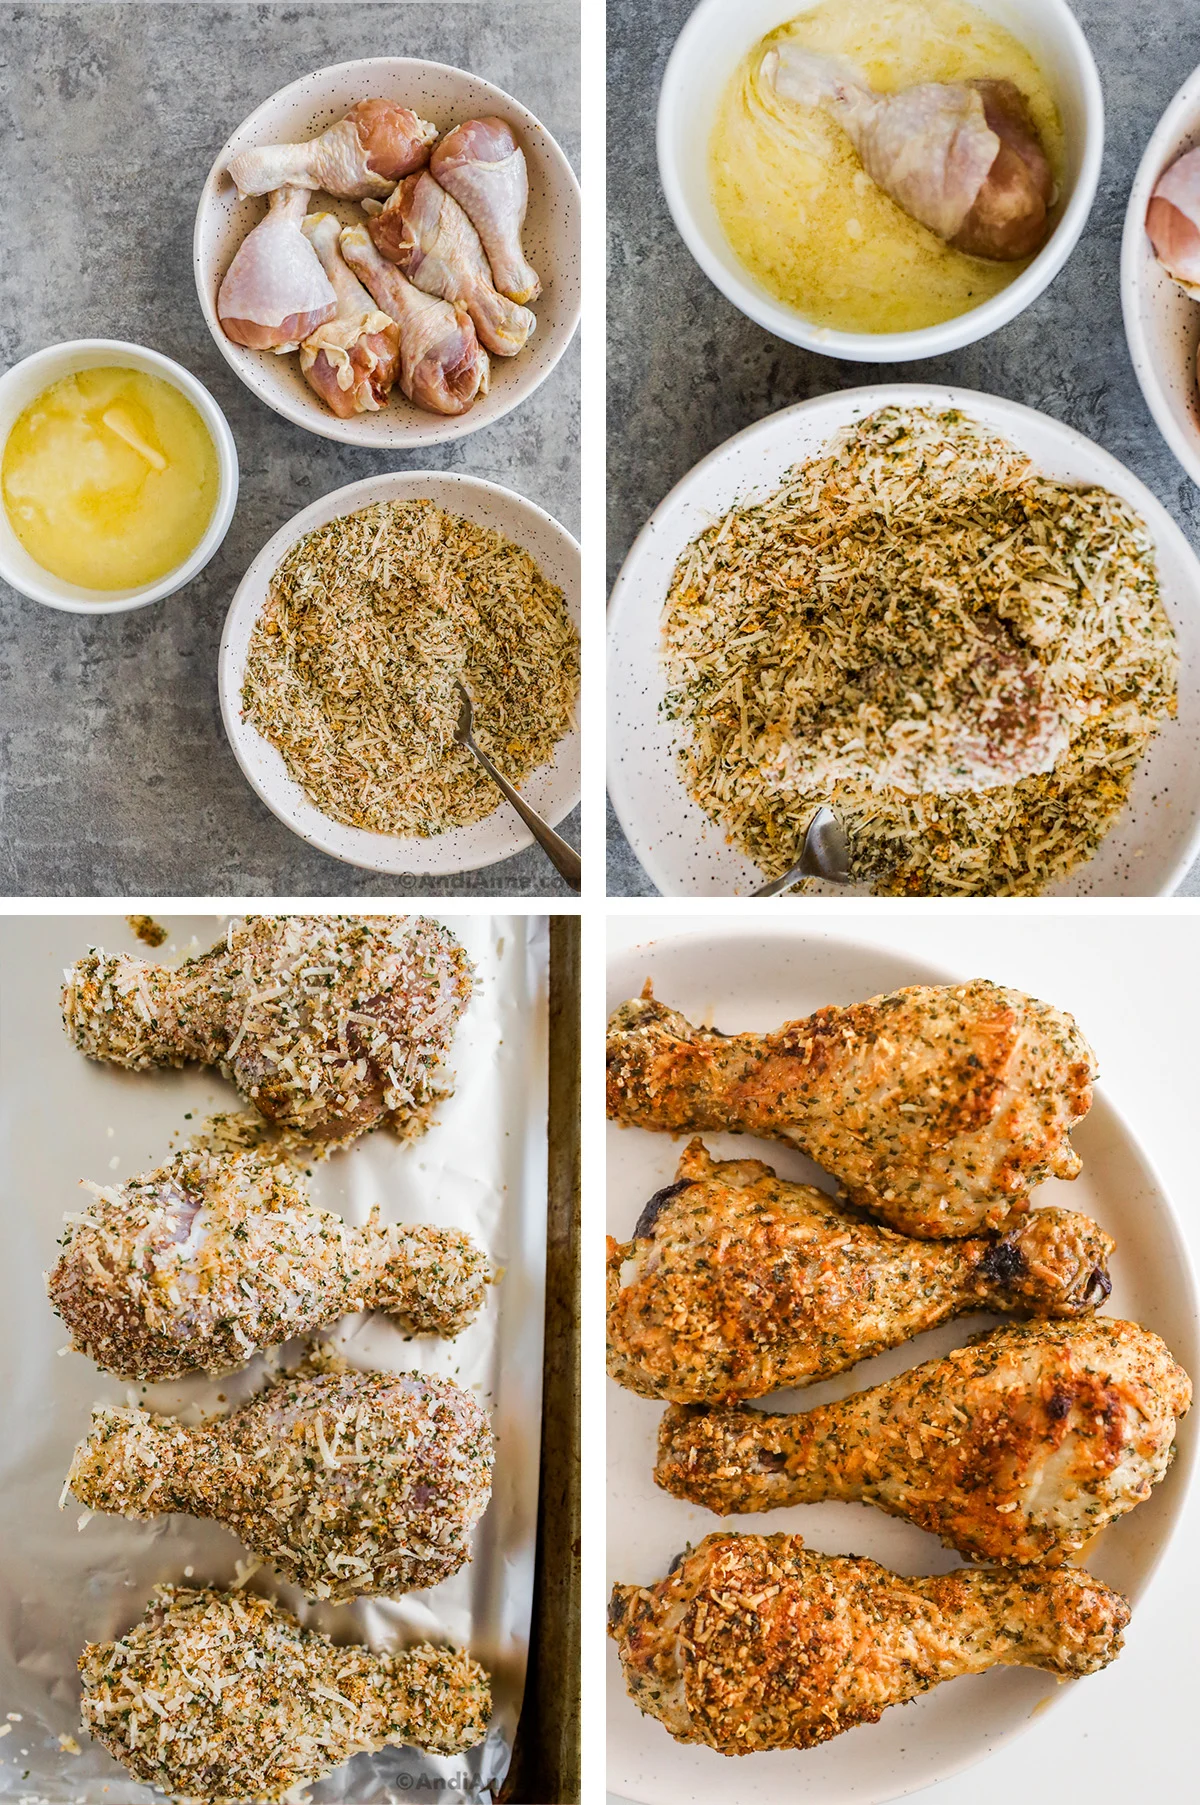 Four images grouped together, first two images are three bowls including raw chicken drumsticks, melted butter, and grated parmesan mixture. Third is raw coated chicken, fourth is crispy baked parmesan chicken.